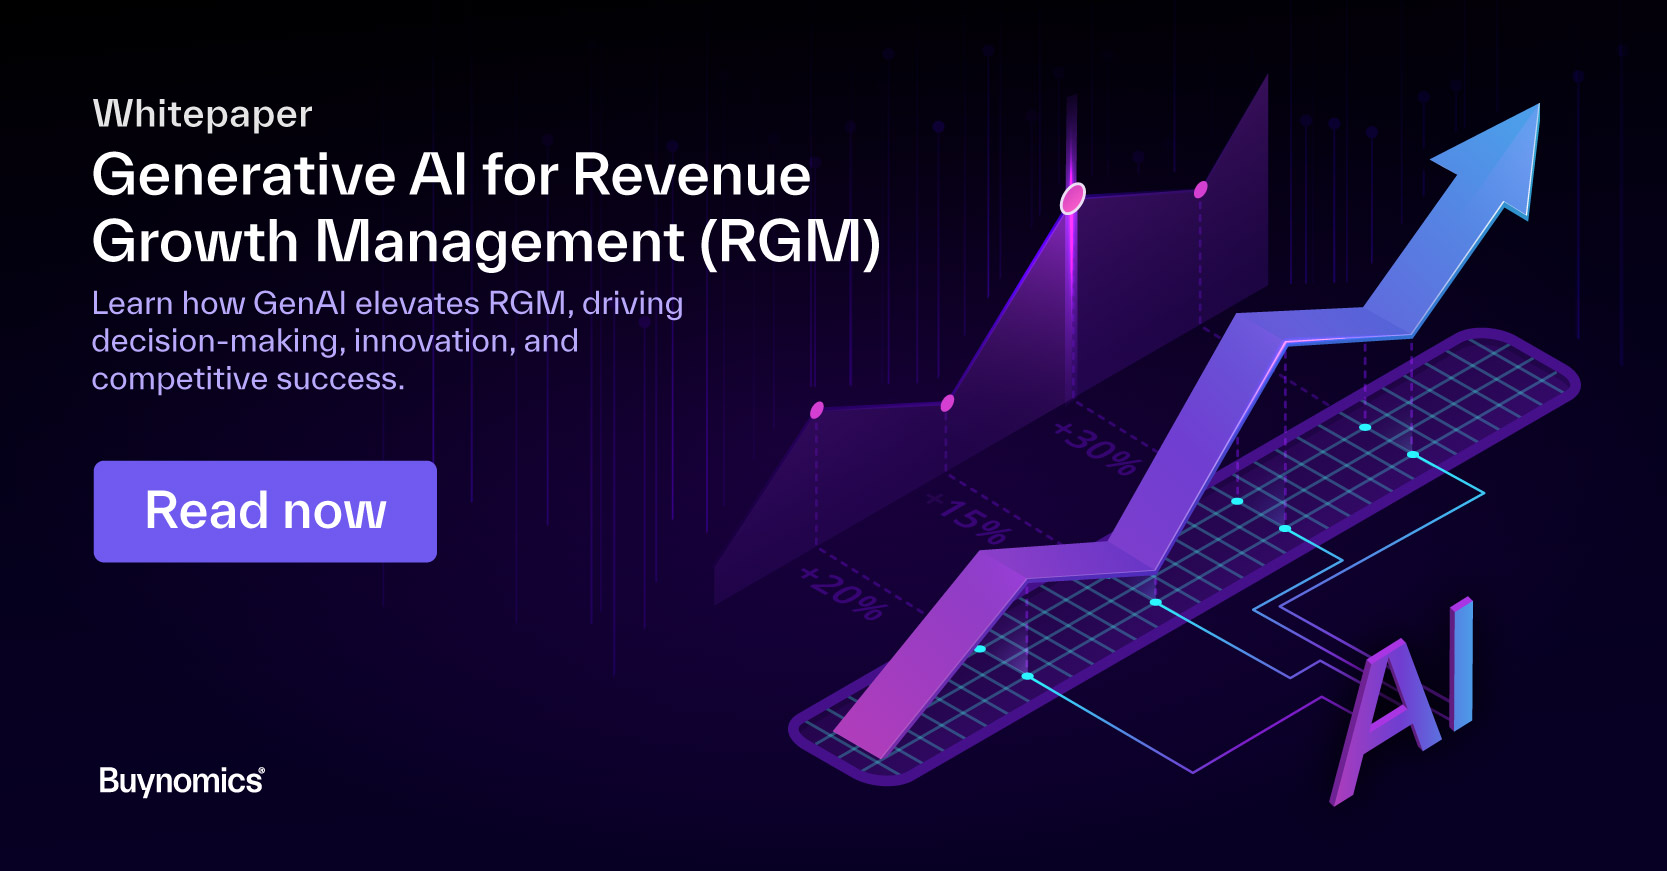 Generative AI for Revenue Growth Management - whitepaper cover image